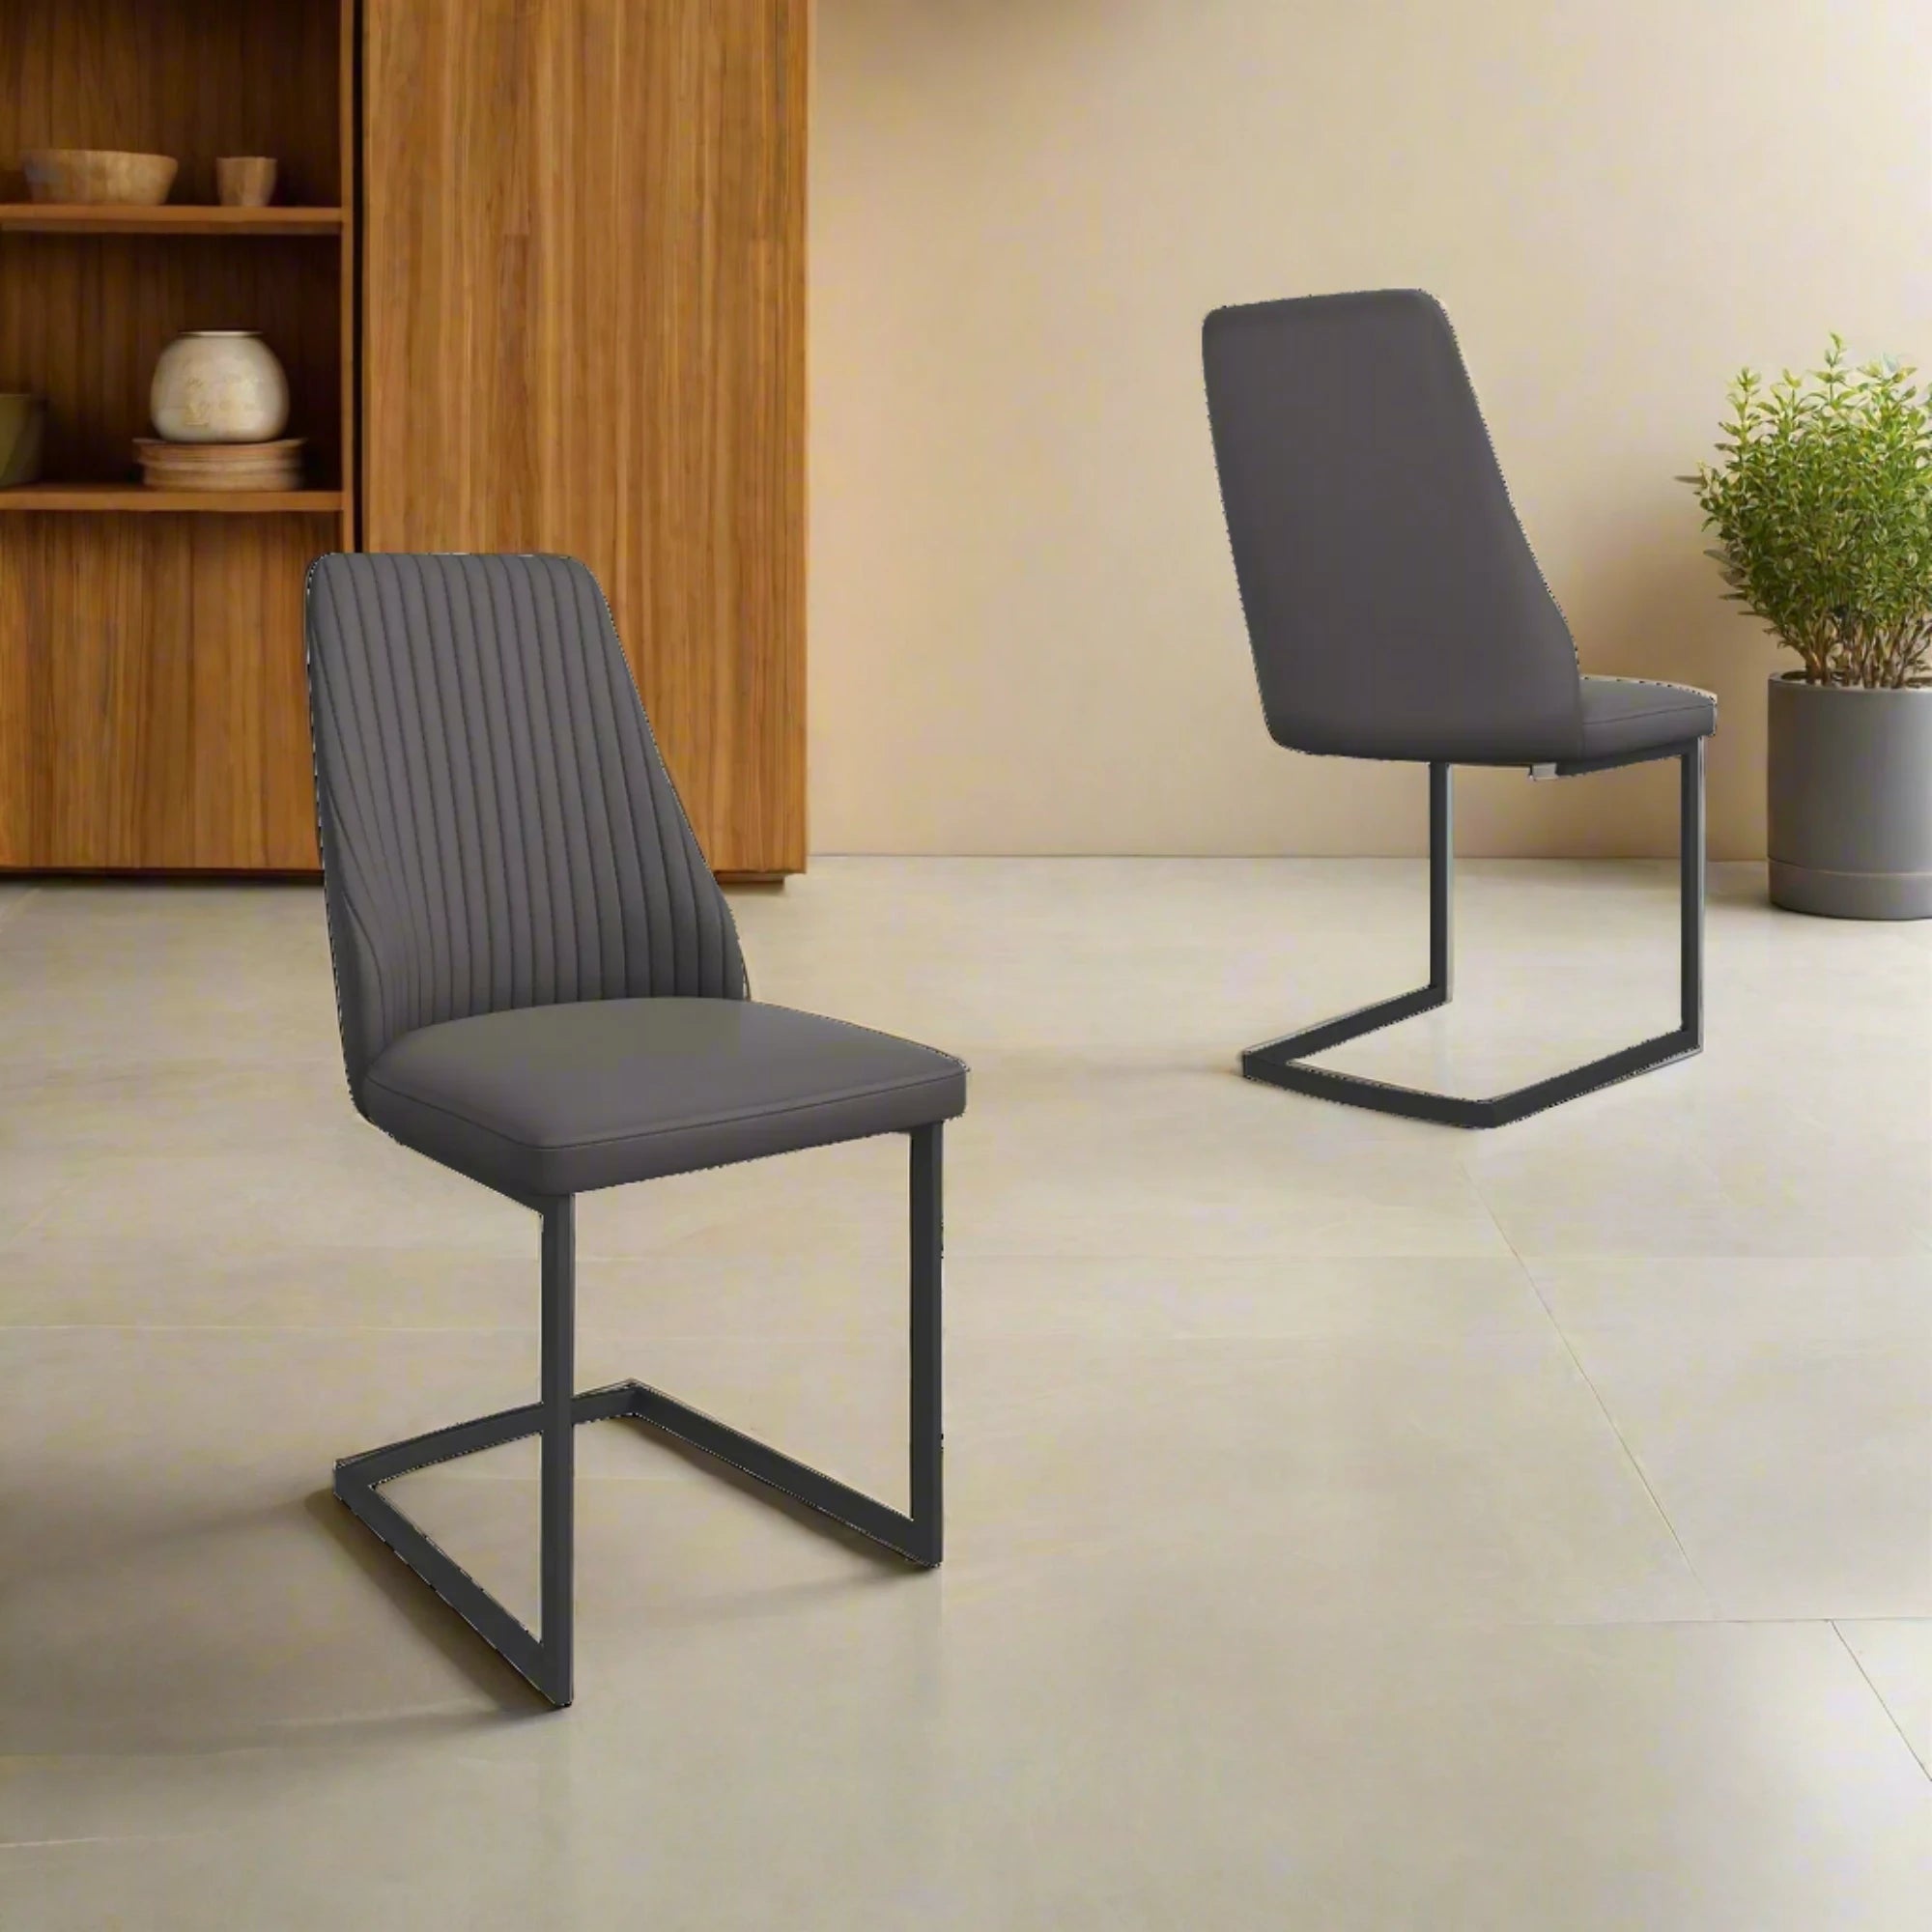 Blakely Dark Grey Leather Dining Chairs - Set of 4